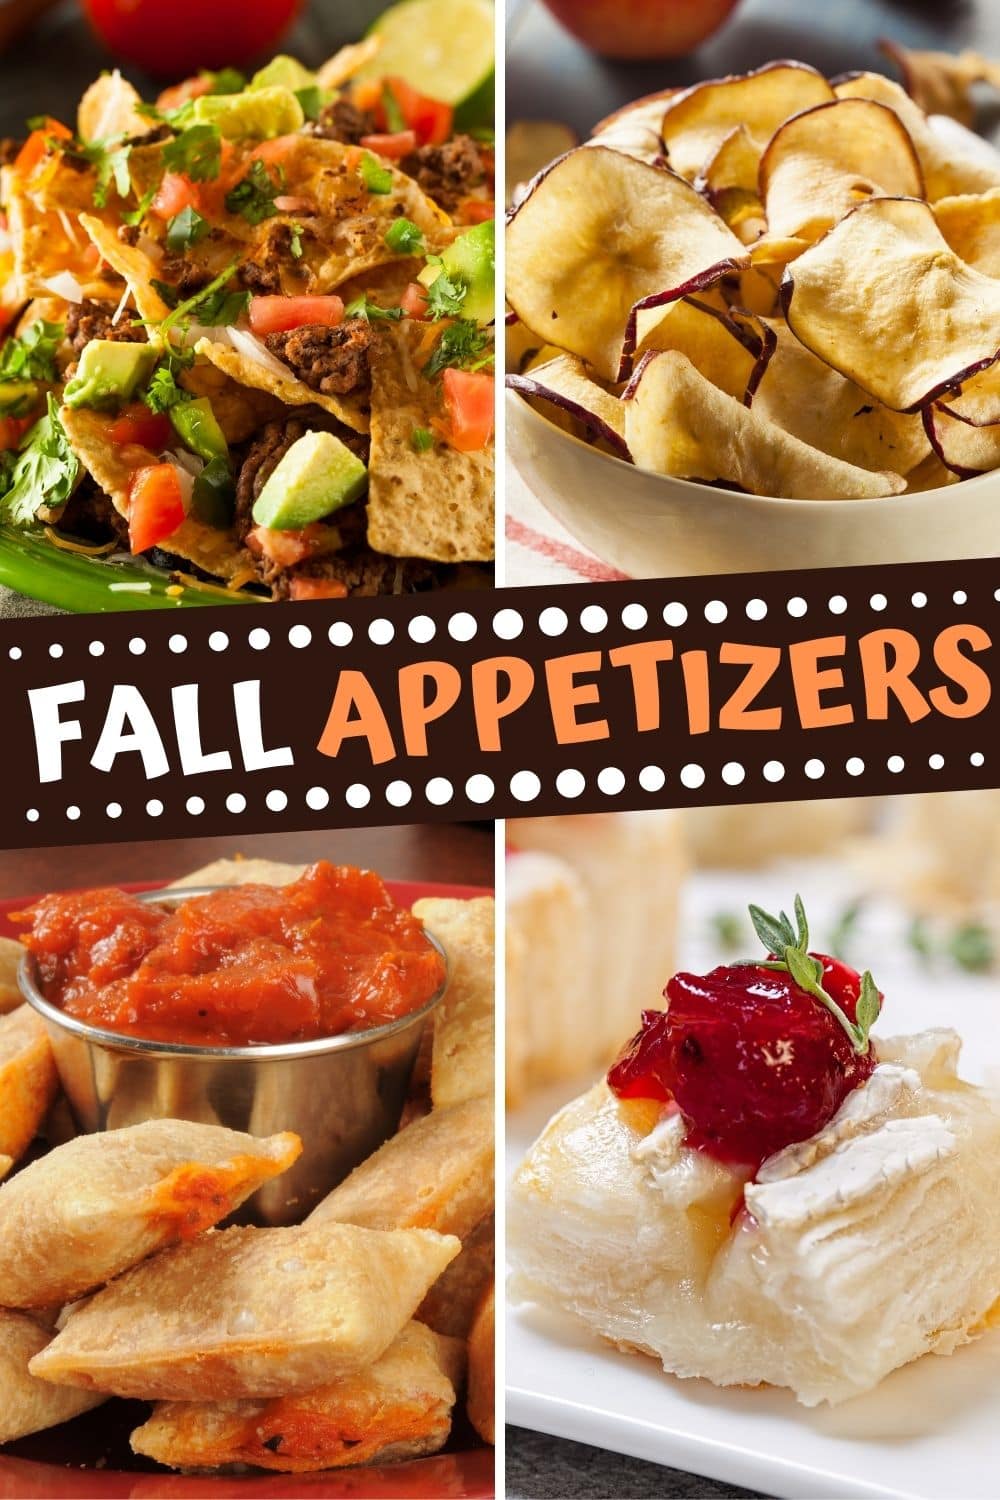 30 Easy Fall Appetizers - Insanely Good